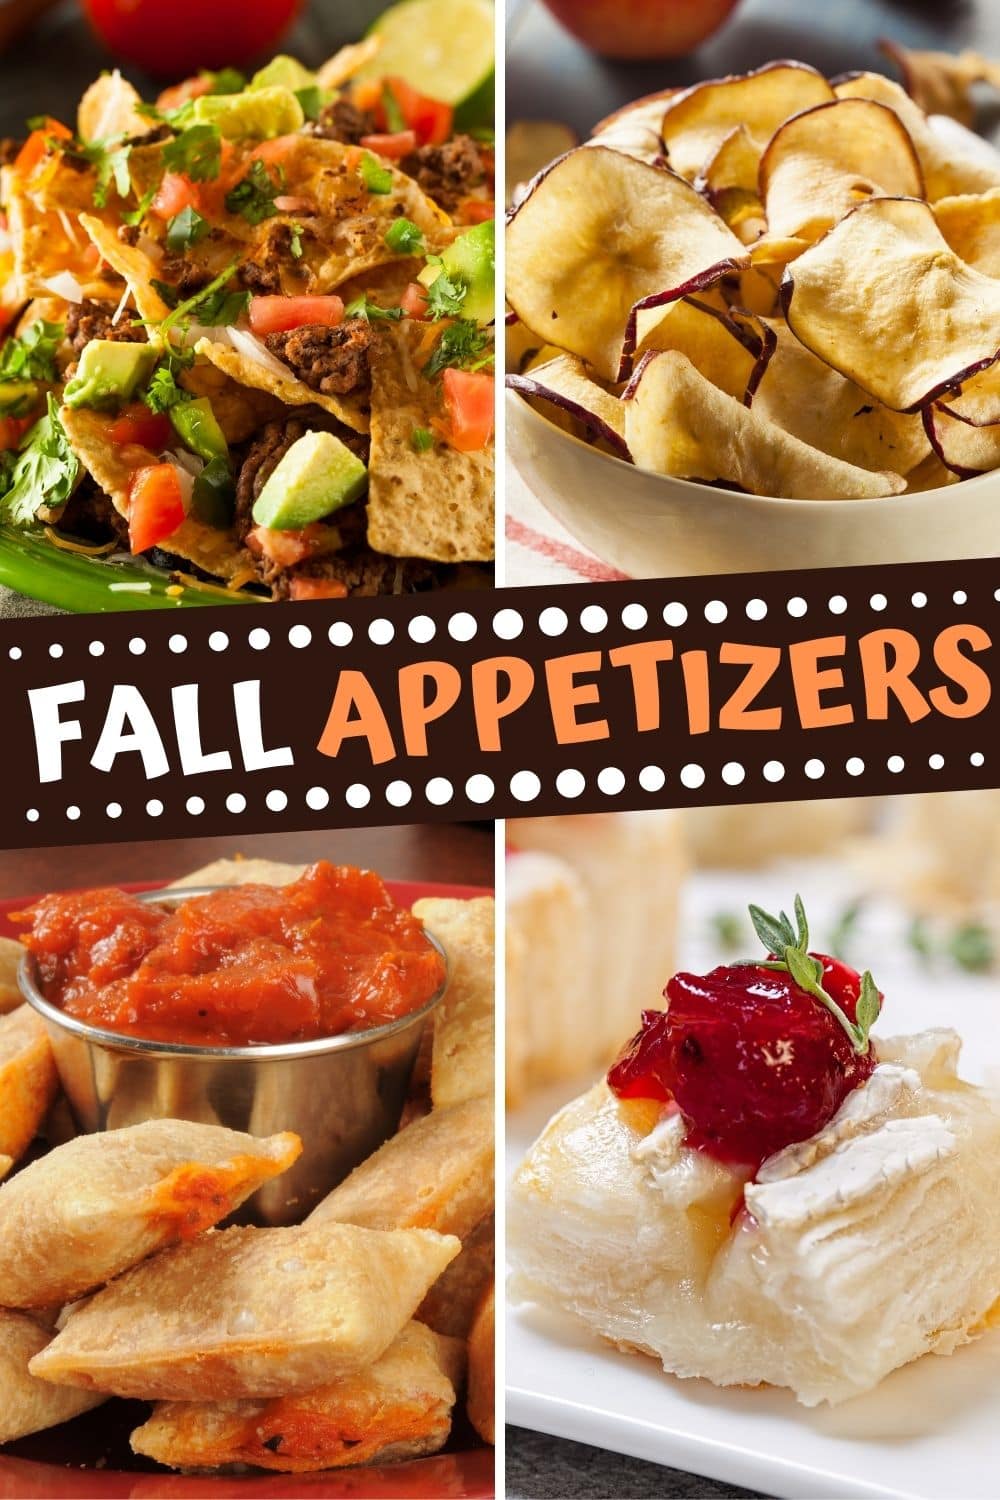 30 Easy Fall Appetizers - Insanely Good